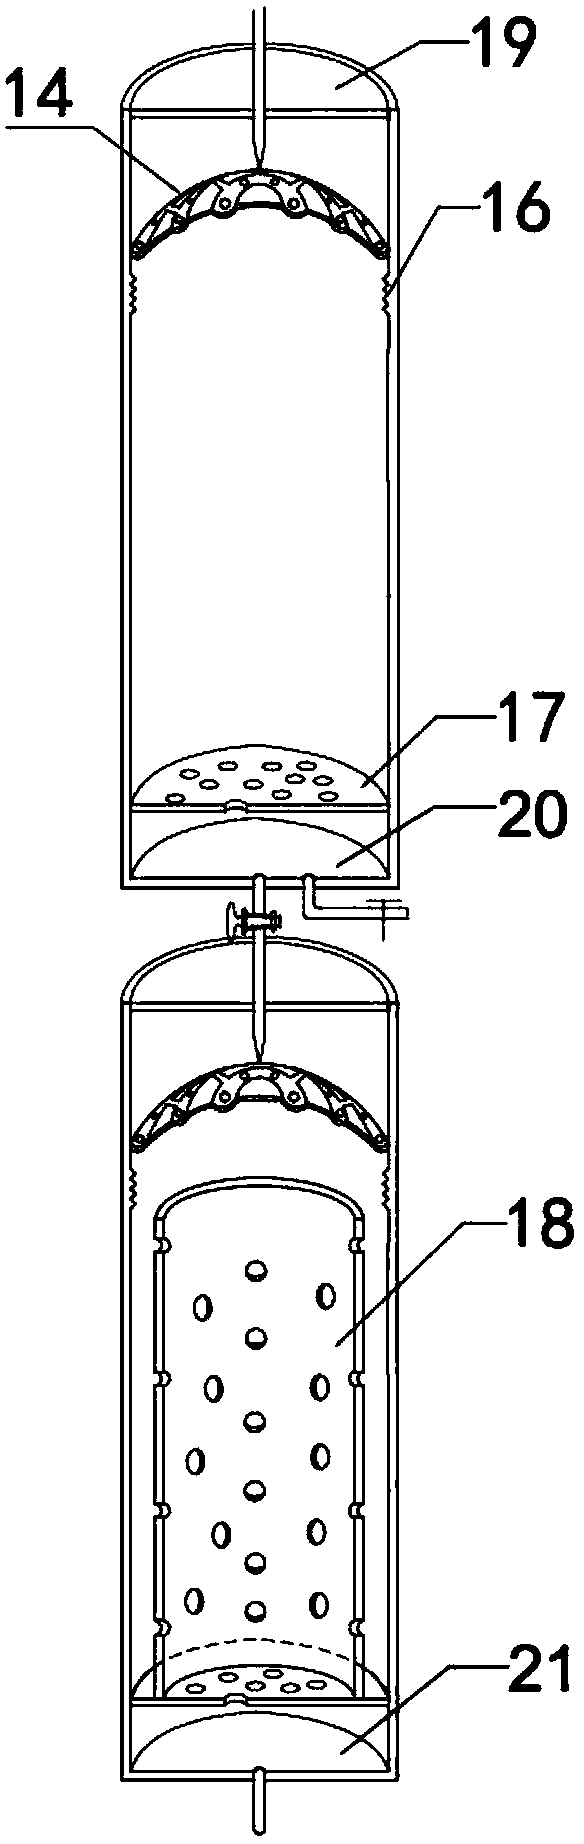 Experiment device capable of uniformly distributing water and simulating water-rock interaction